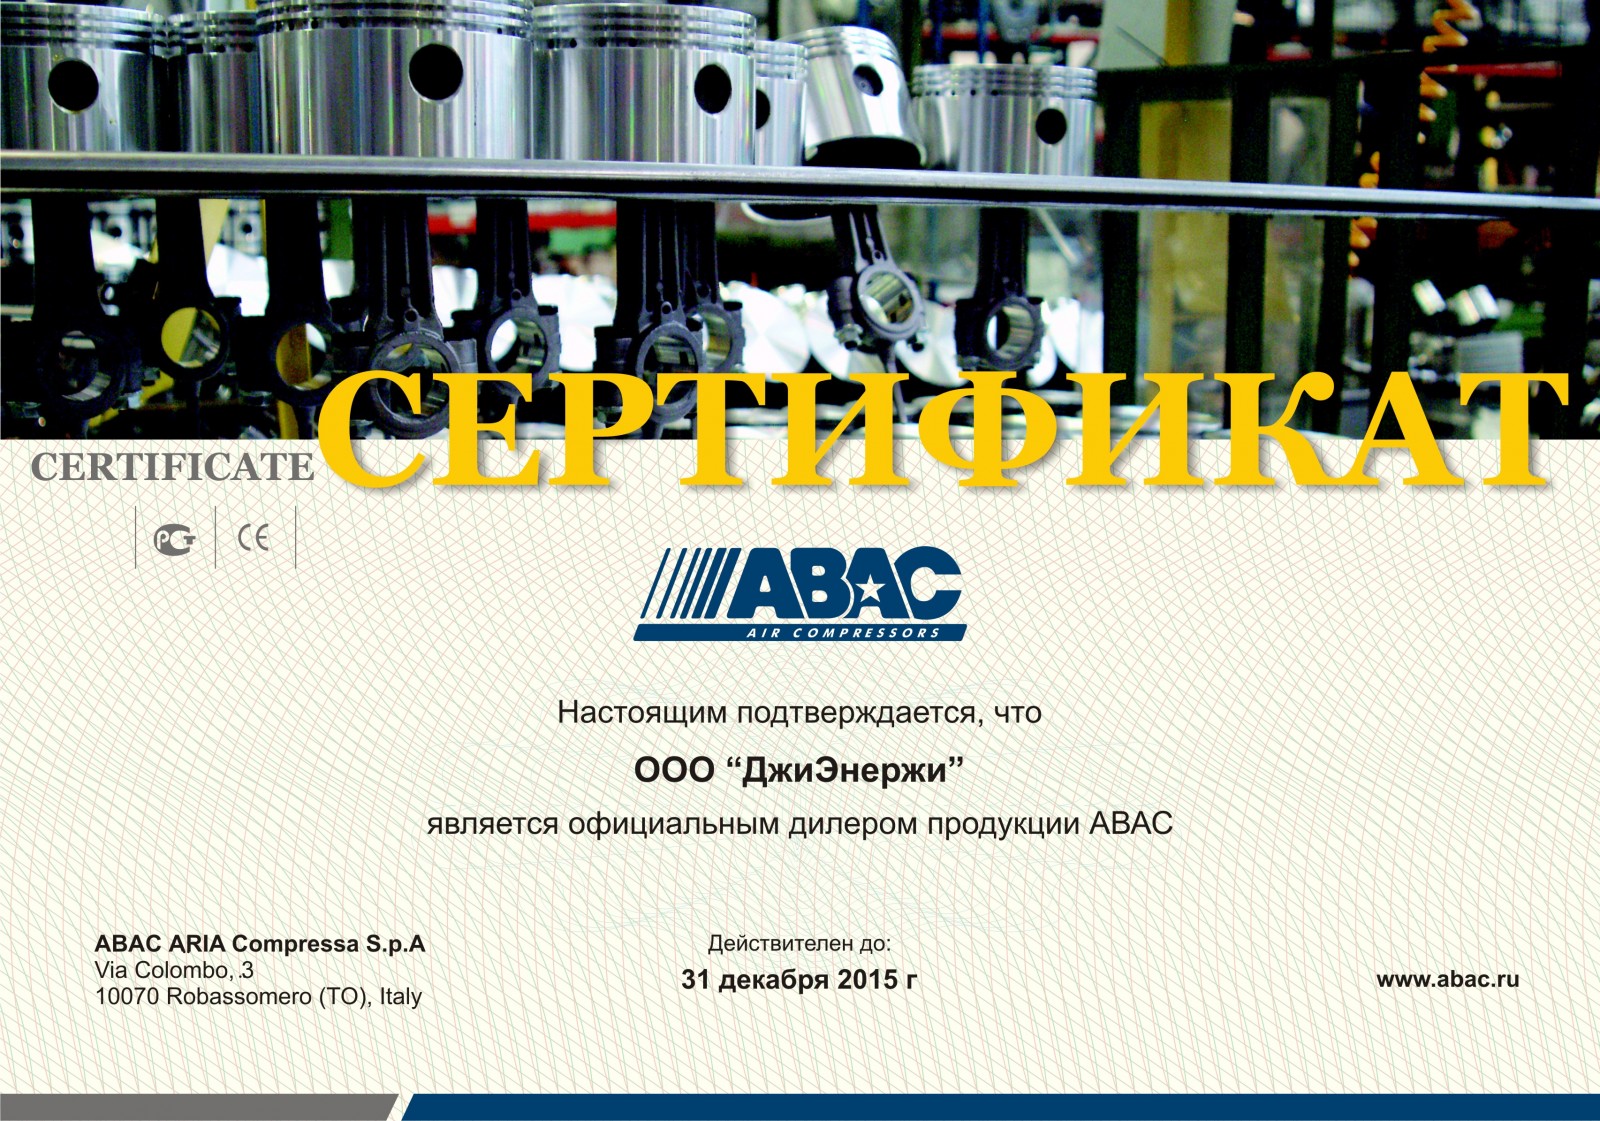 ABAC certificate